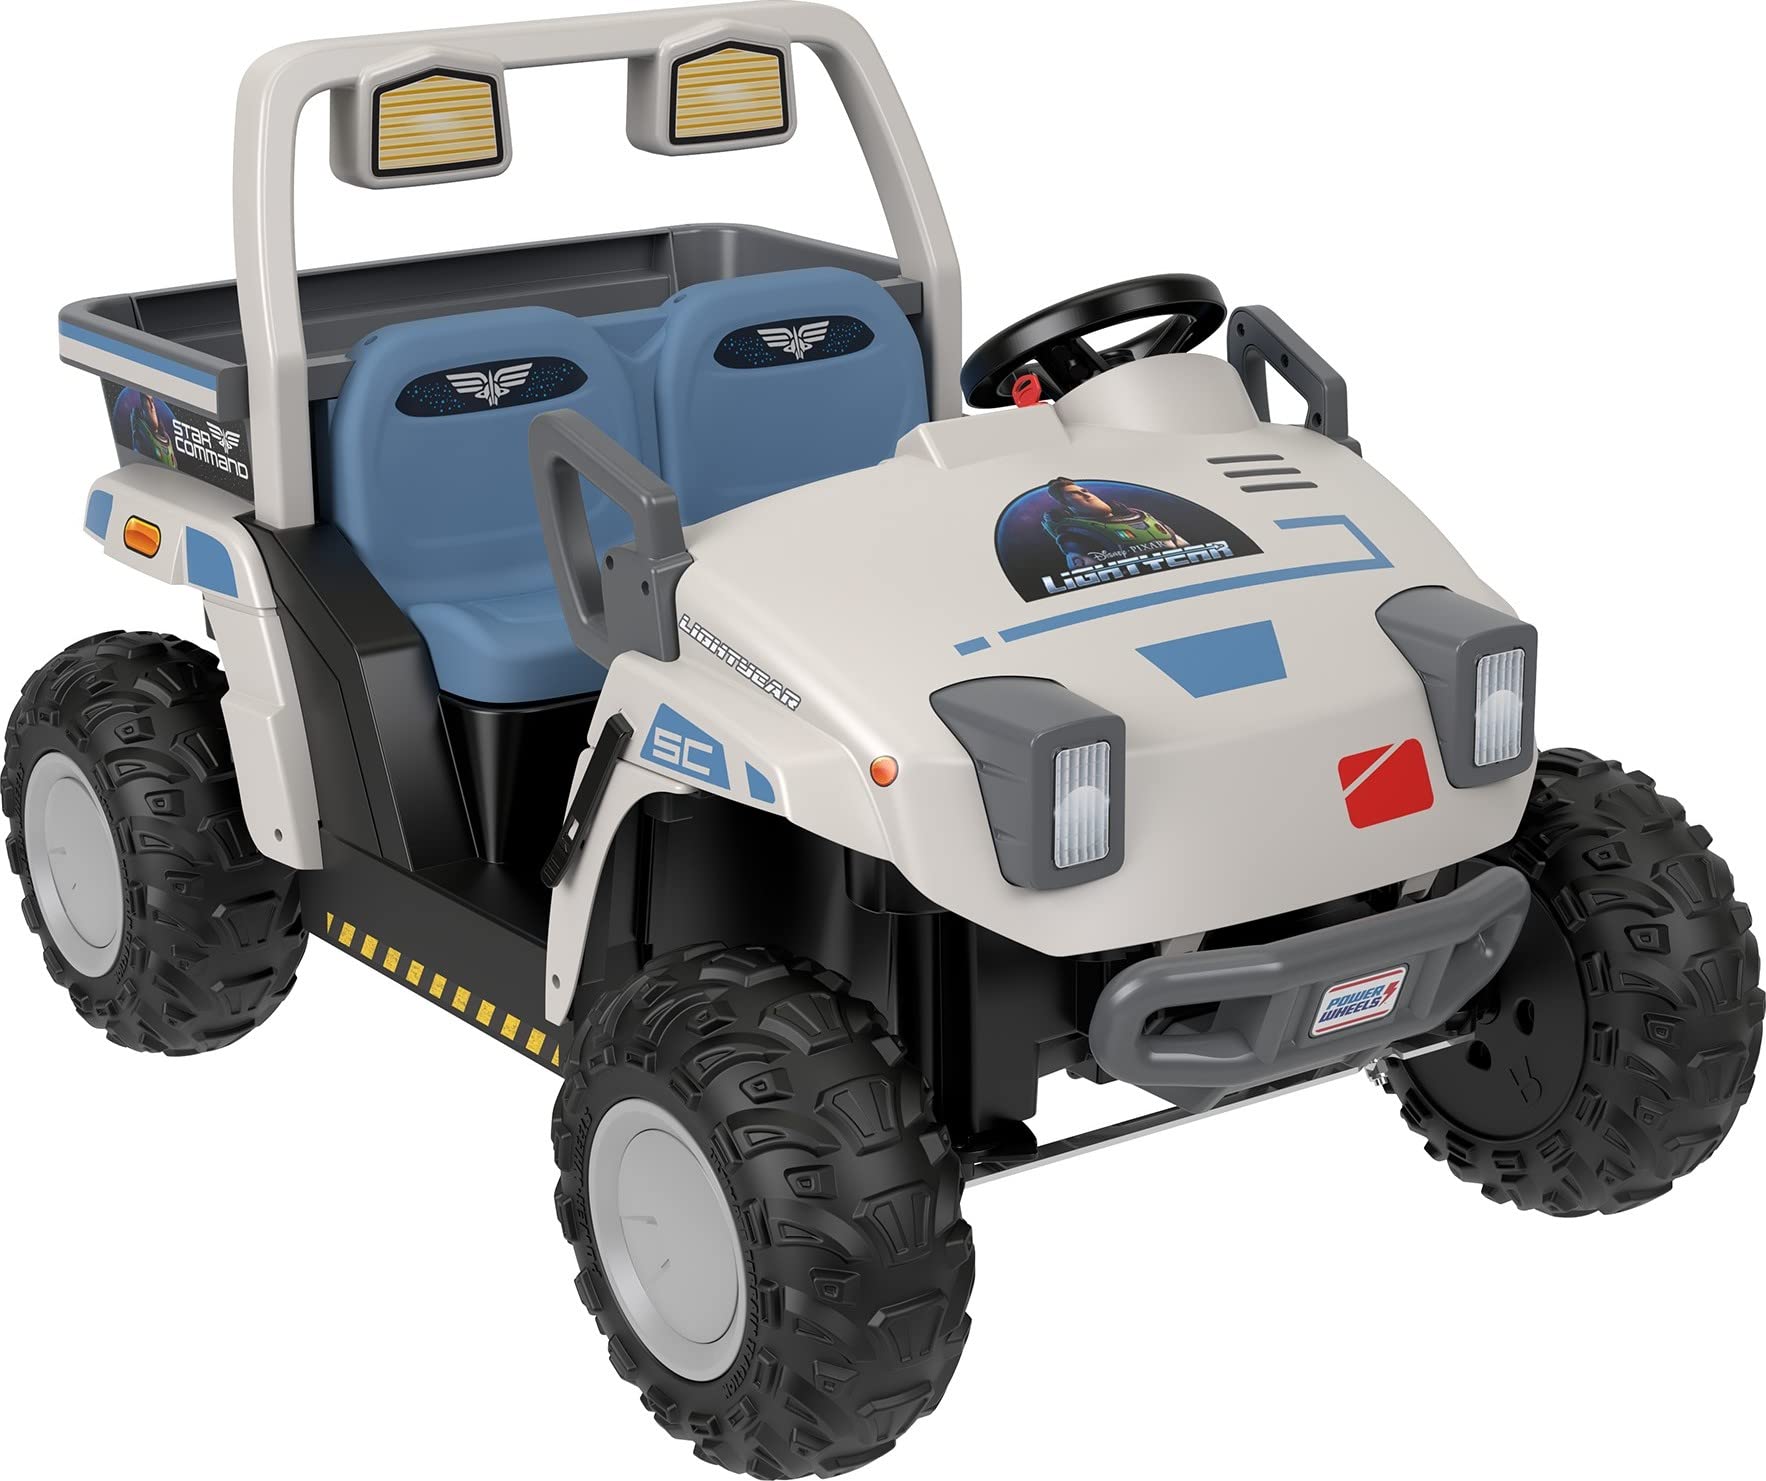 Power Wheels Star command Base Transport Vehicle Ride-On, Disney and Pixar Lightyear, Battery-Powered Toy for Preschool Kids Age